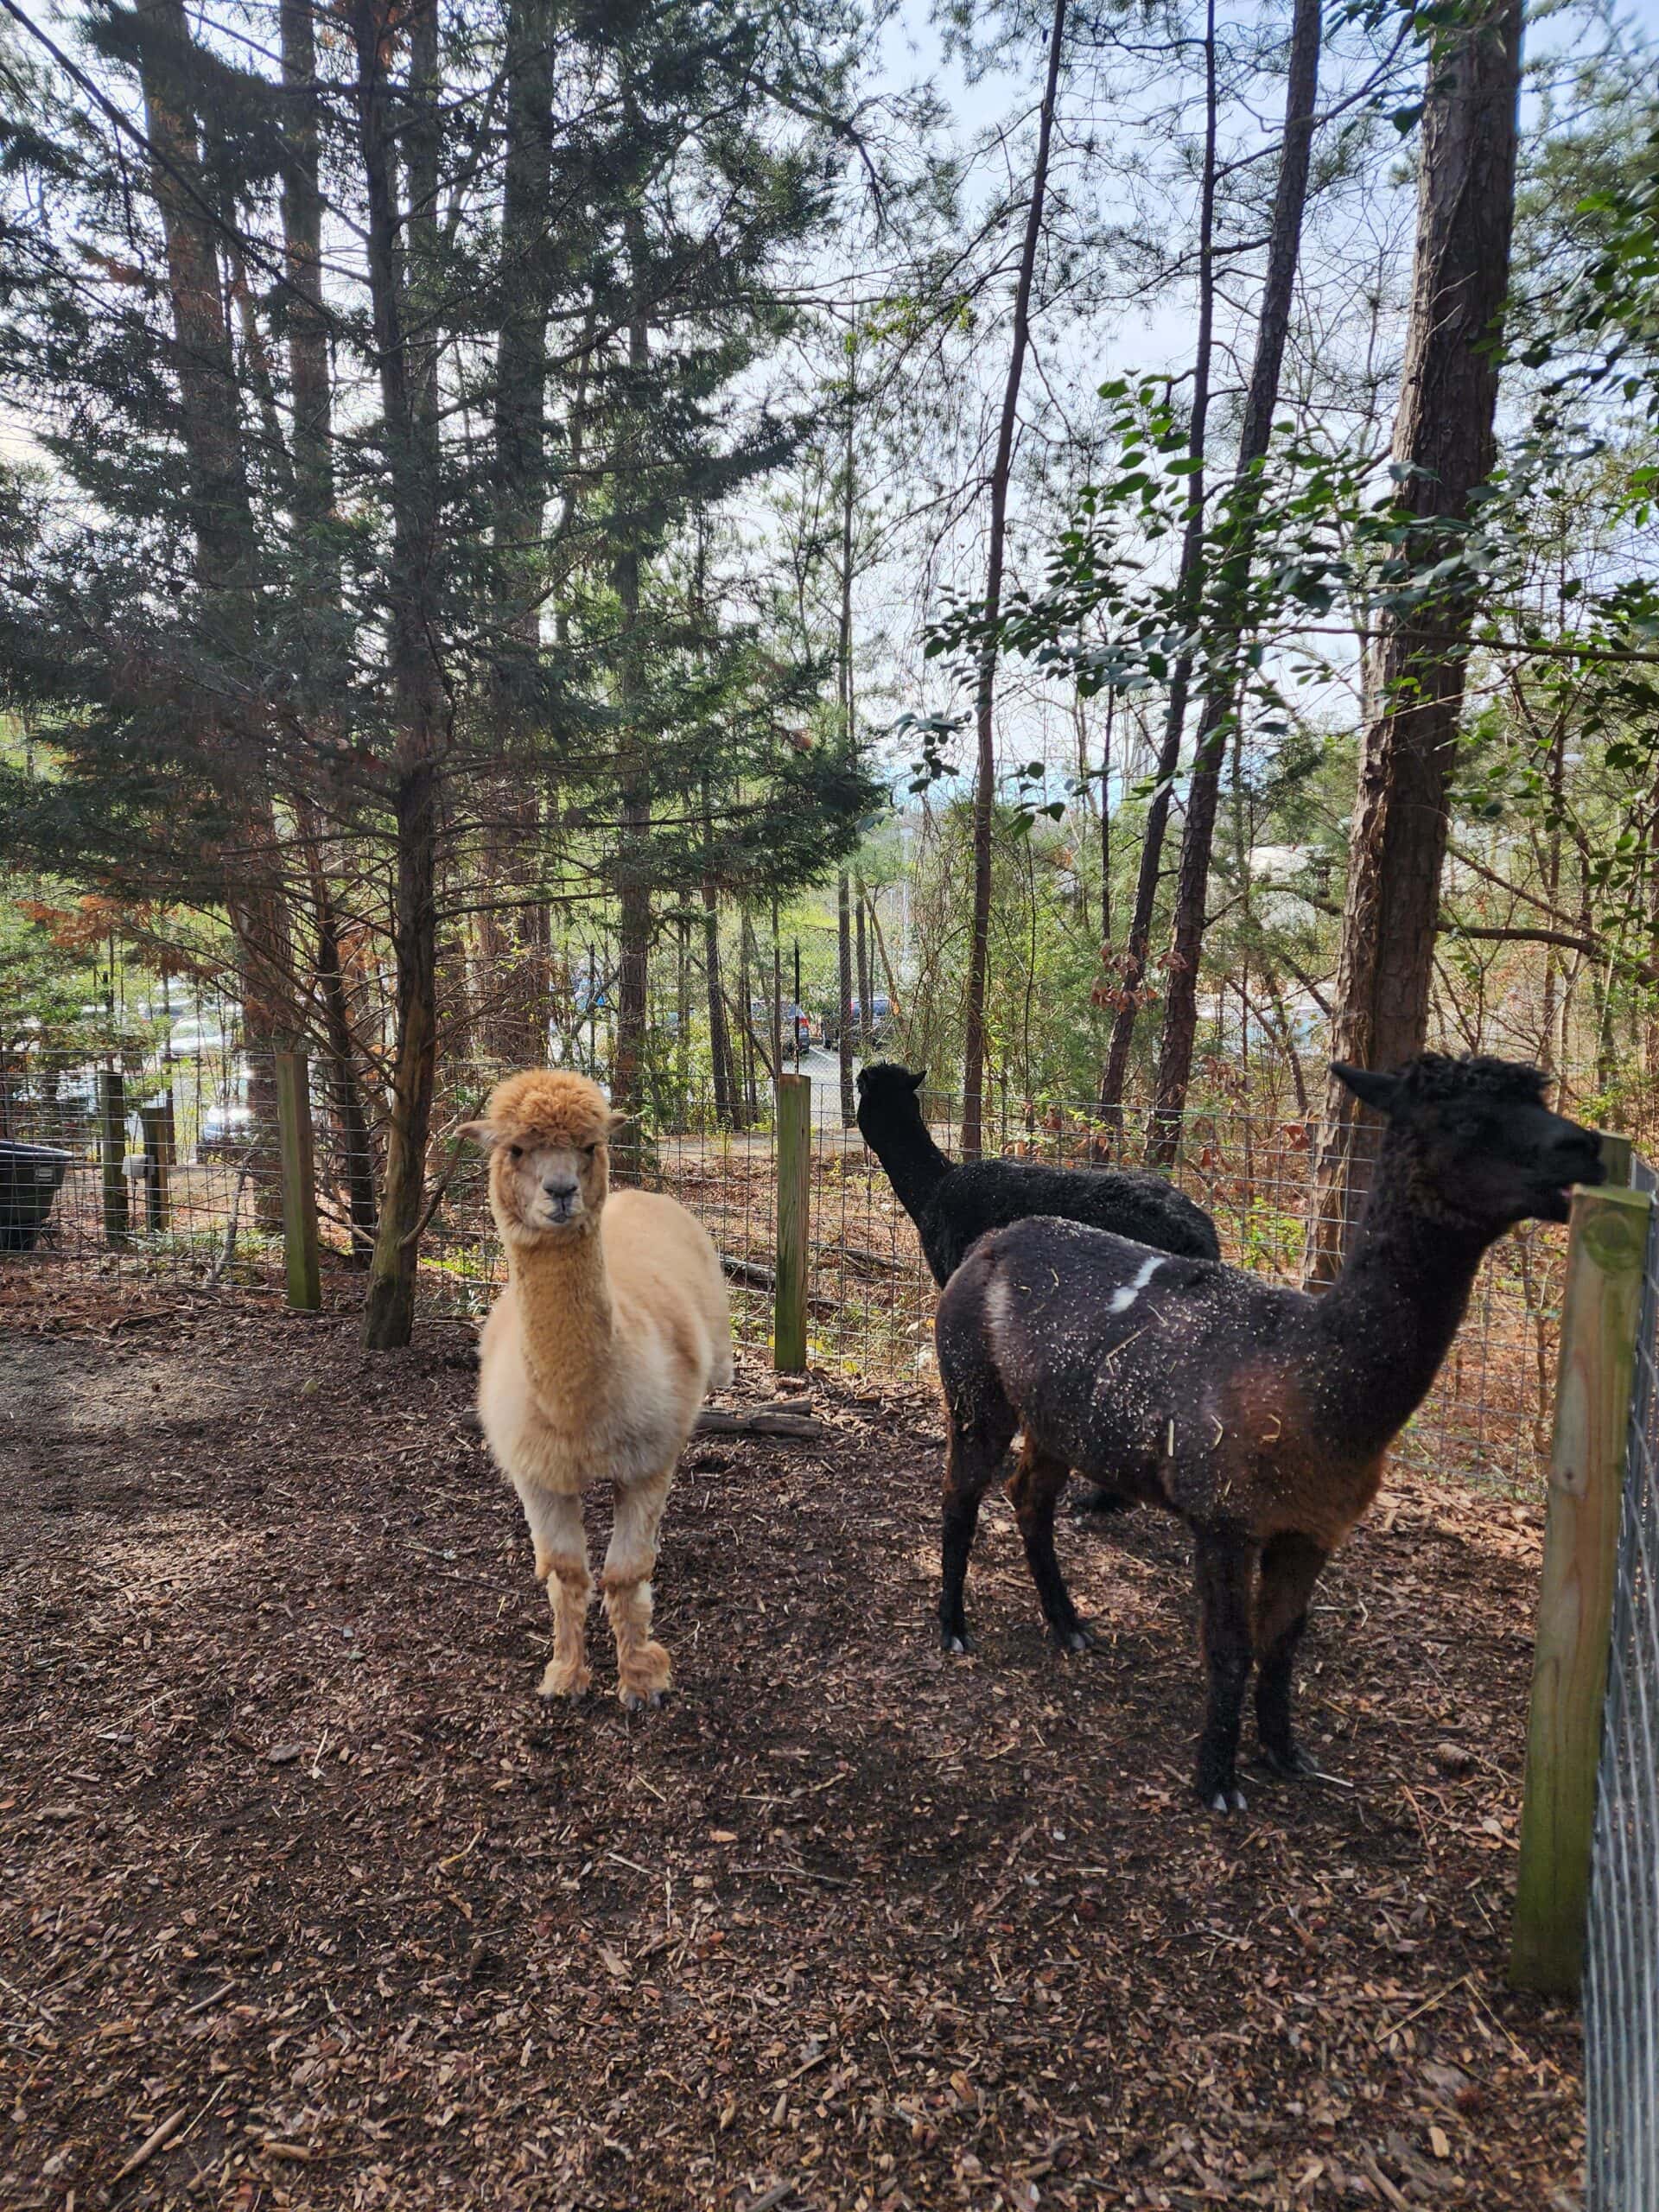 Two alpacas, one cream-colored and one black, stand alert in their enclosure, surrounded by tall pine trees and wood chip ground cover, embodying the peaceful coexistence of wildlife and nature